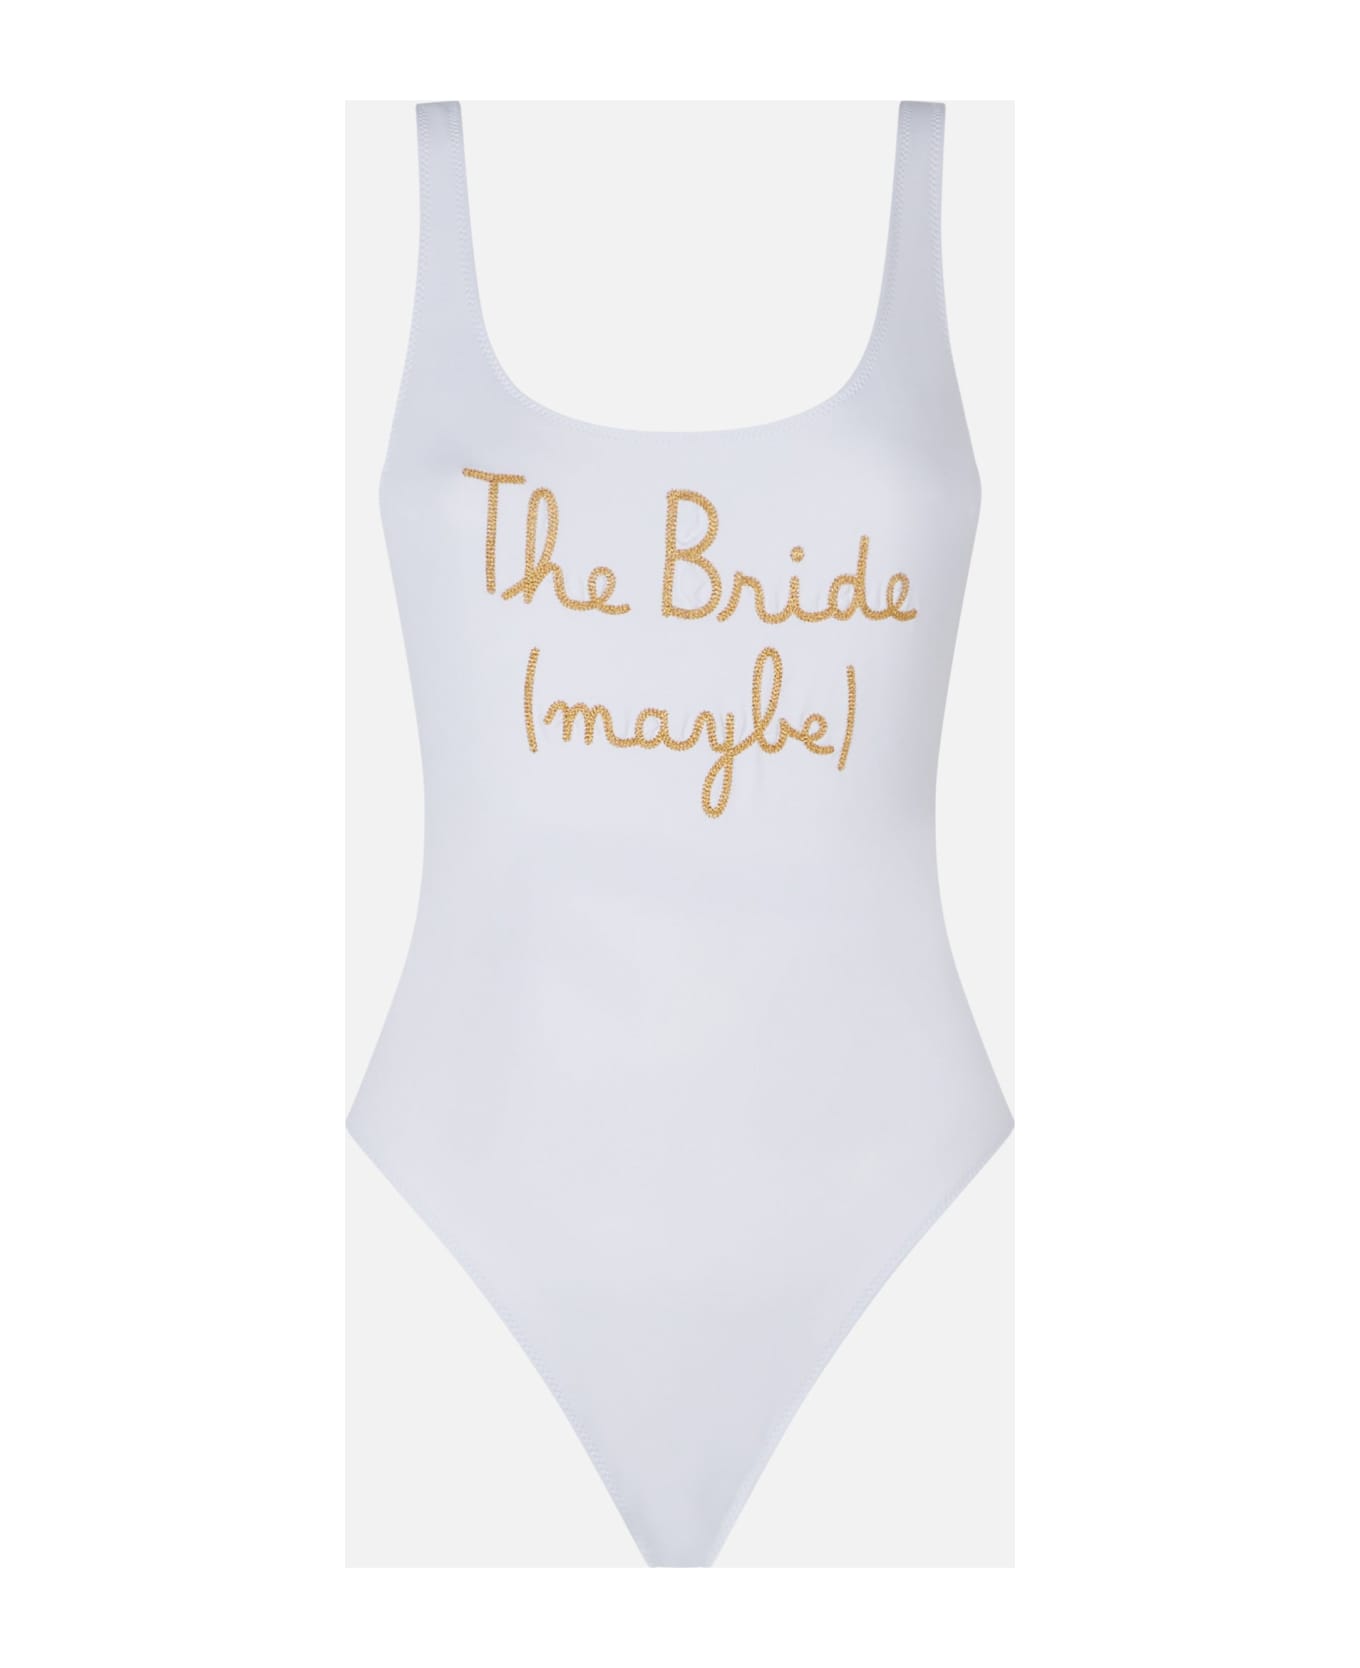 MC2 Saint Barth Woman One Piece Swimsuit With The Bride (maybe) Embroidery - WHITE